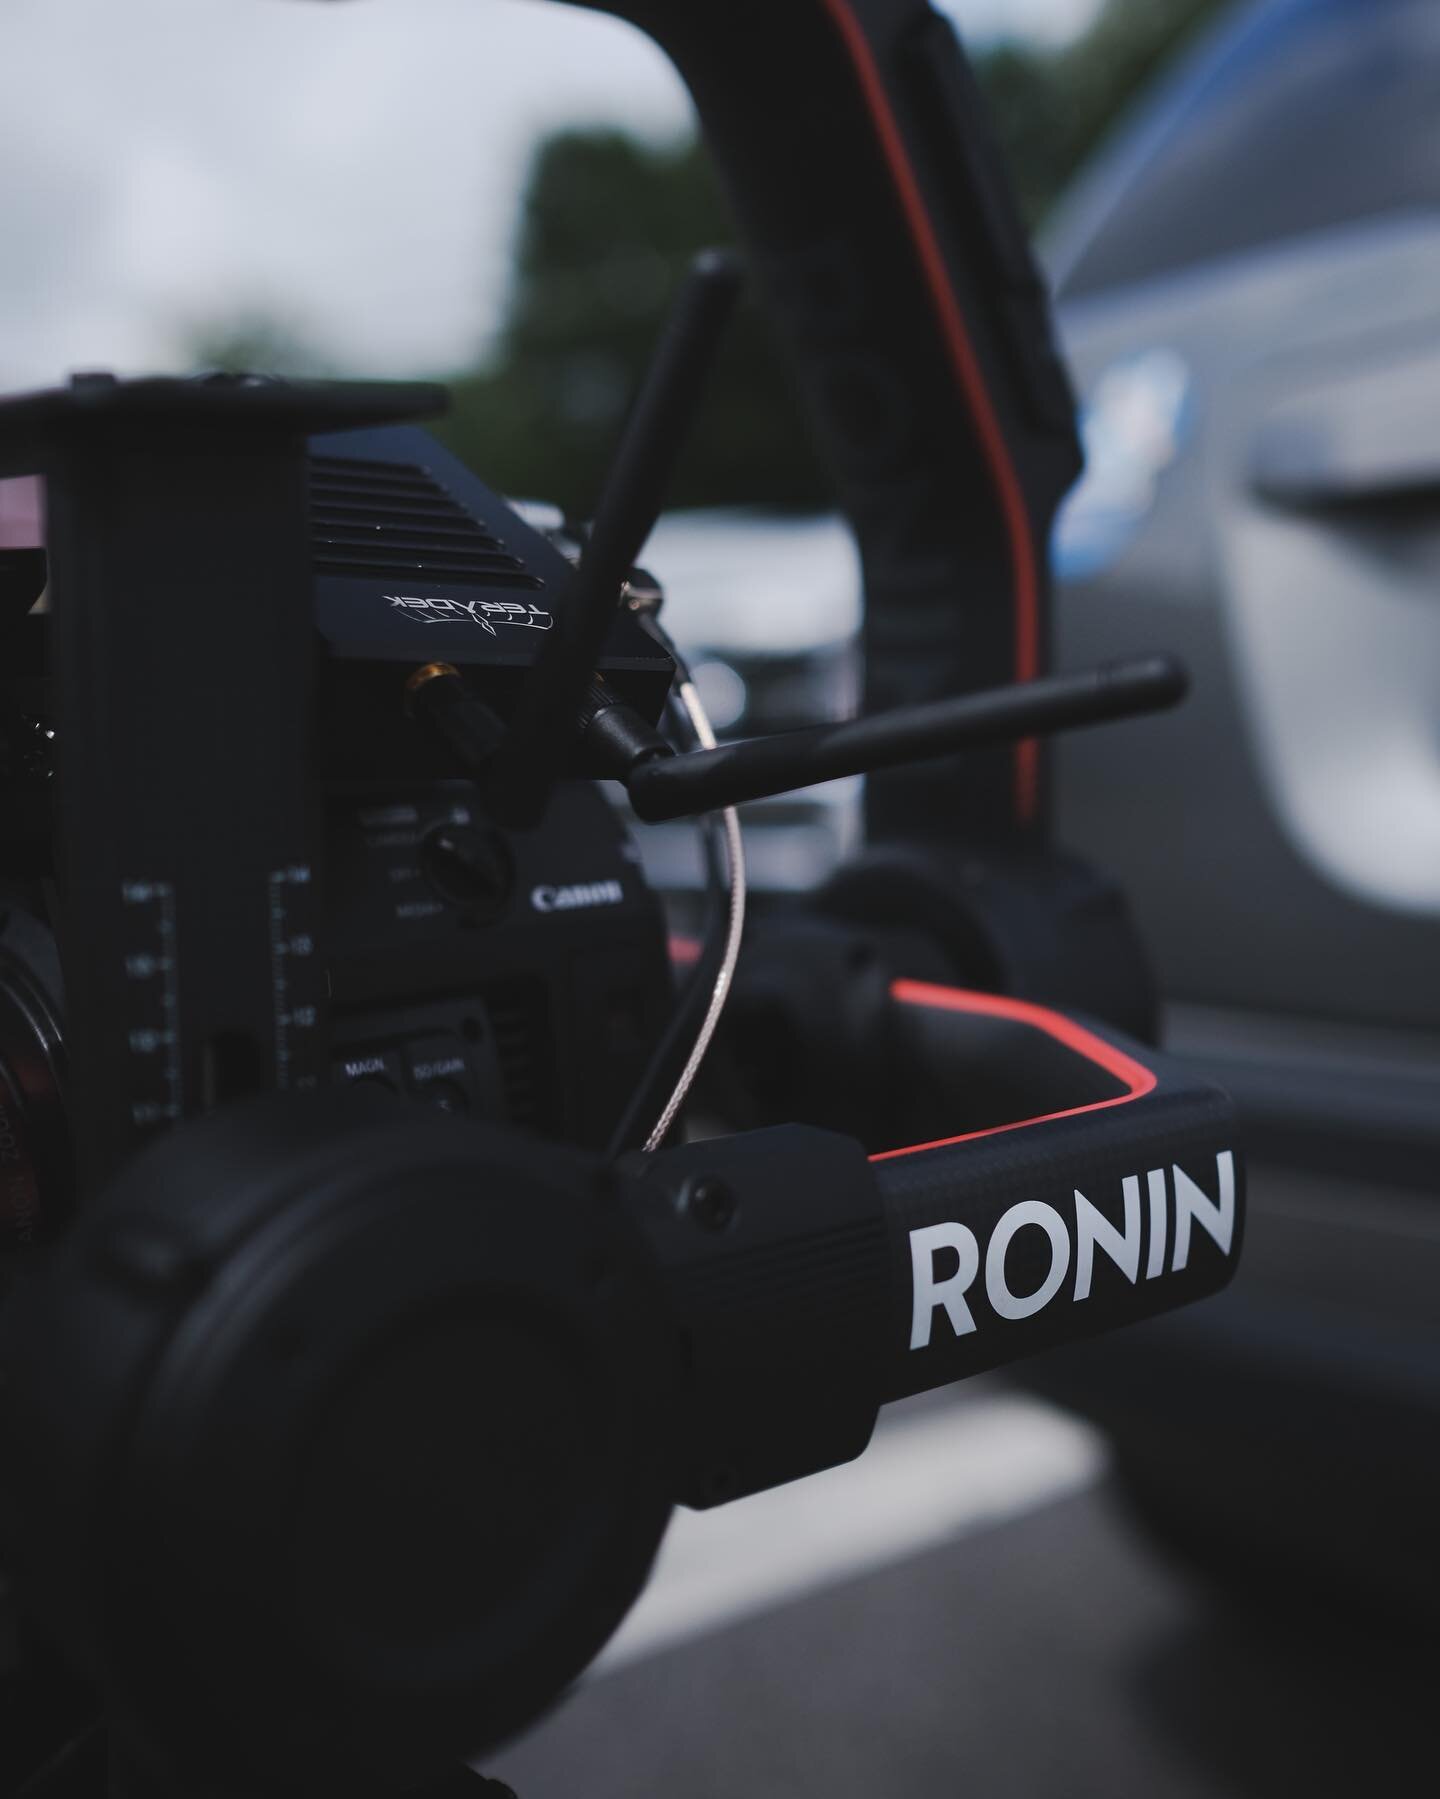 Love this gimbal! The Ronin 2 always seems to be able to easily handle anything we throw at it.

#blackarm #ronin2 #canon #canonc200 #canon1880 #chasecar #canon #70200mm #djironin2 #blackarm #flowcine #cinematography #chasecar #trackingvehicle #camer